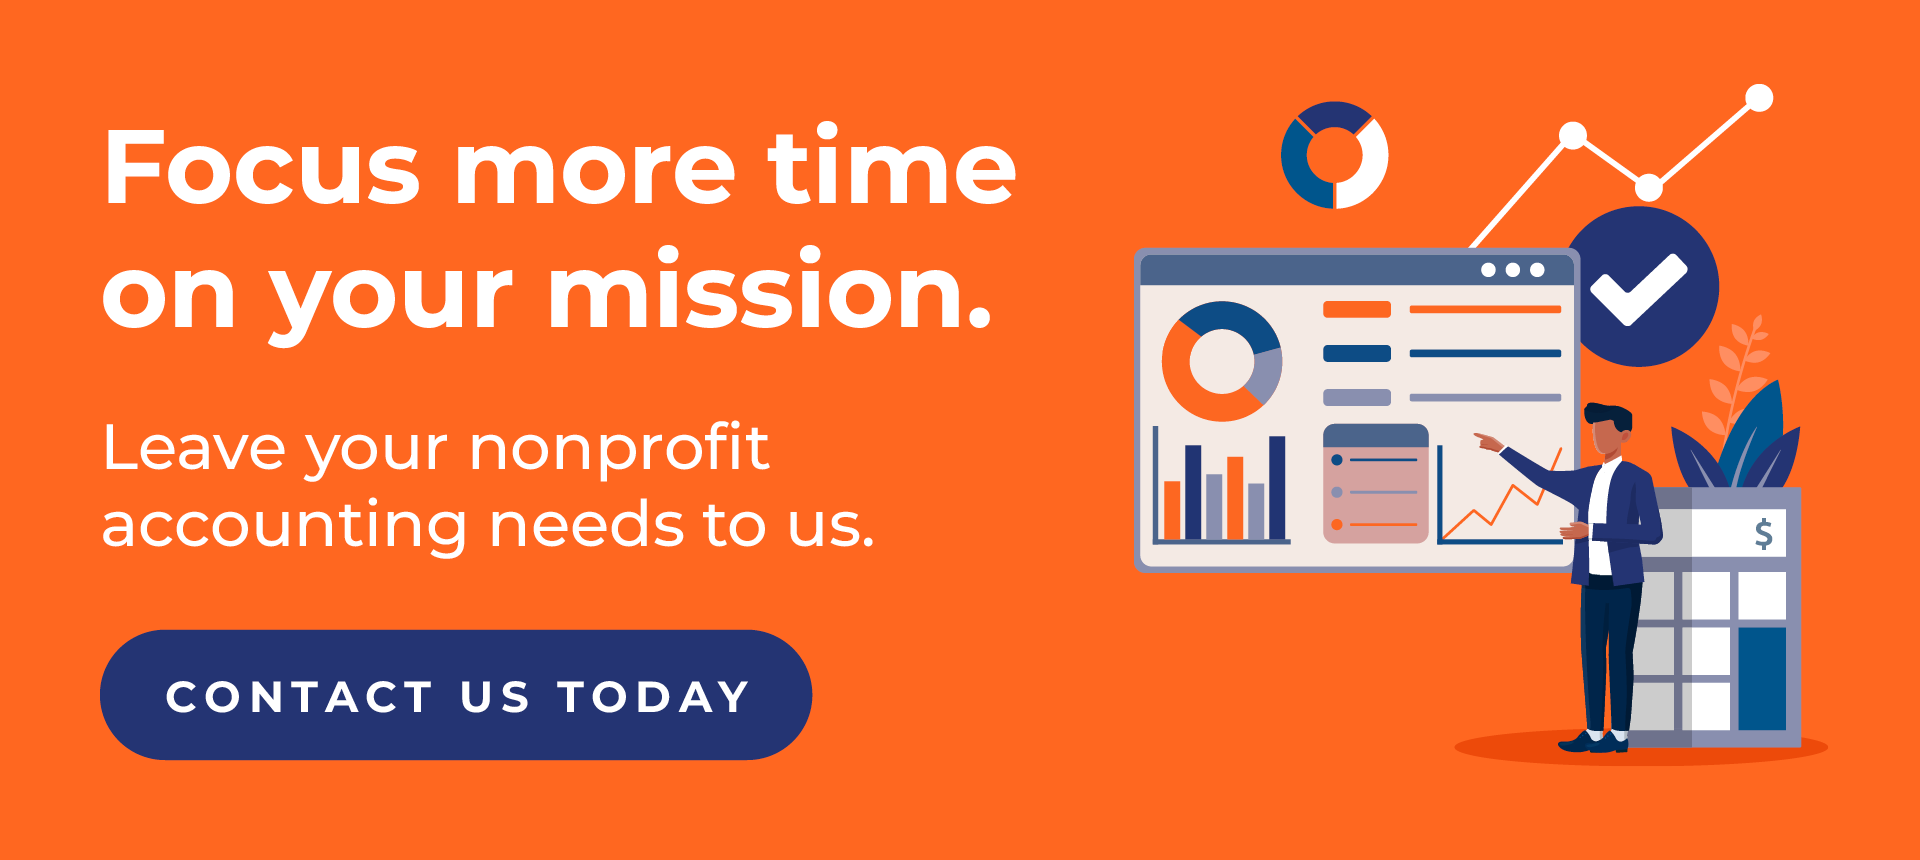 Contact us today to focus more time on your mission and less on nonprofit accounting.